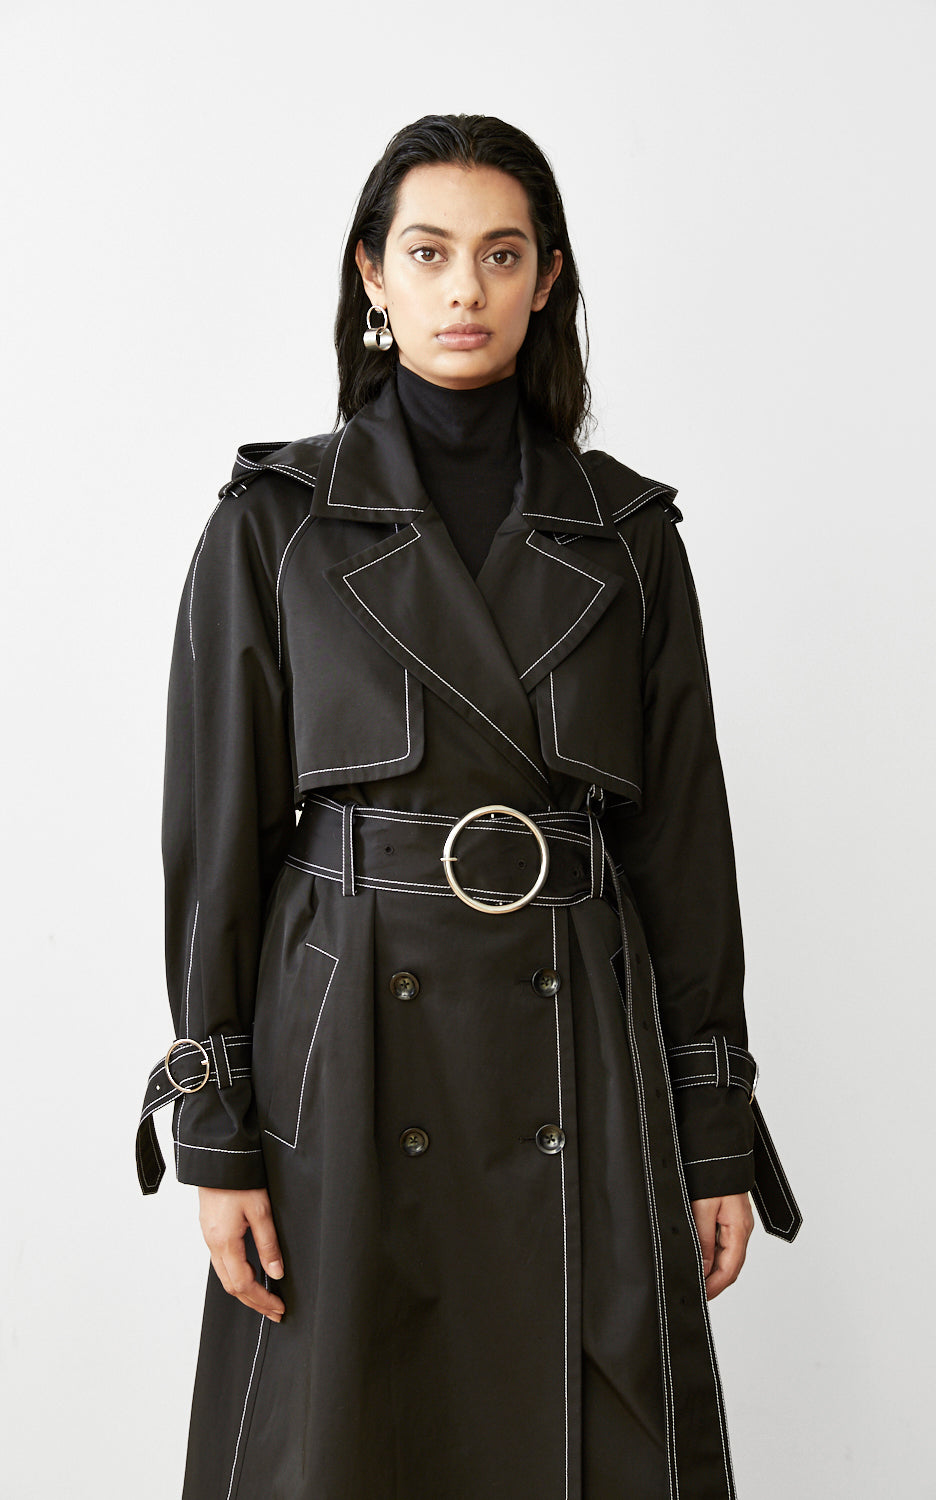 SUSTAINABLE CONTRAST STITCH BLACK TRENCH COAT